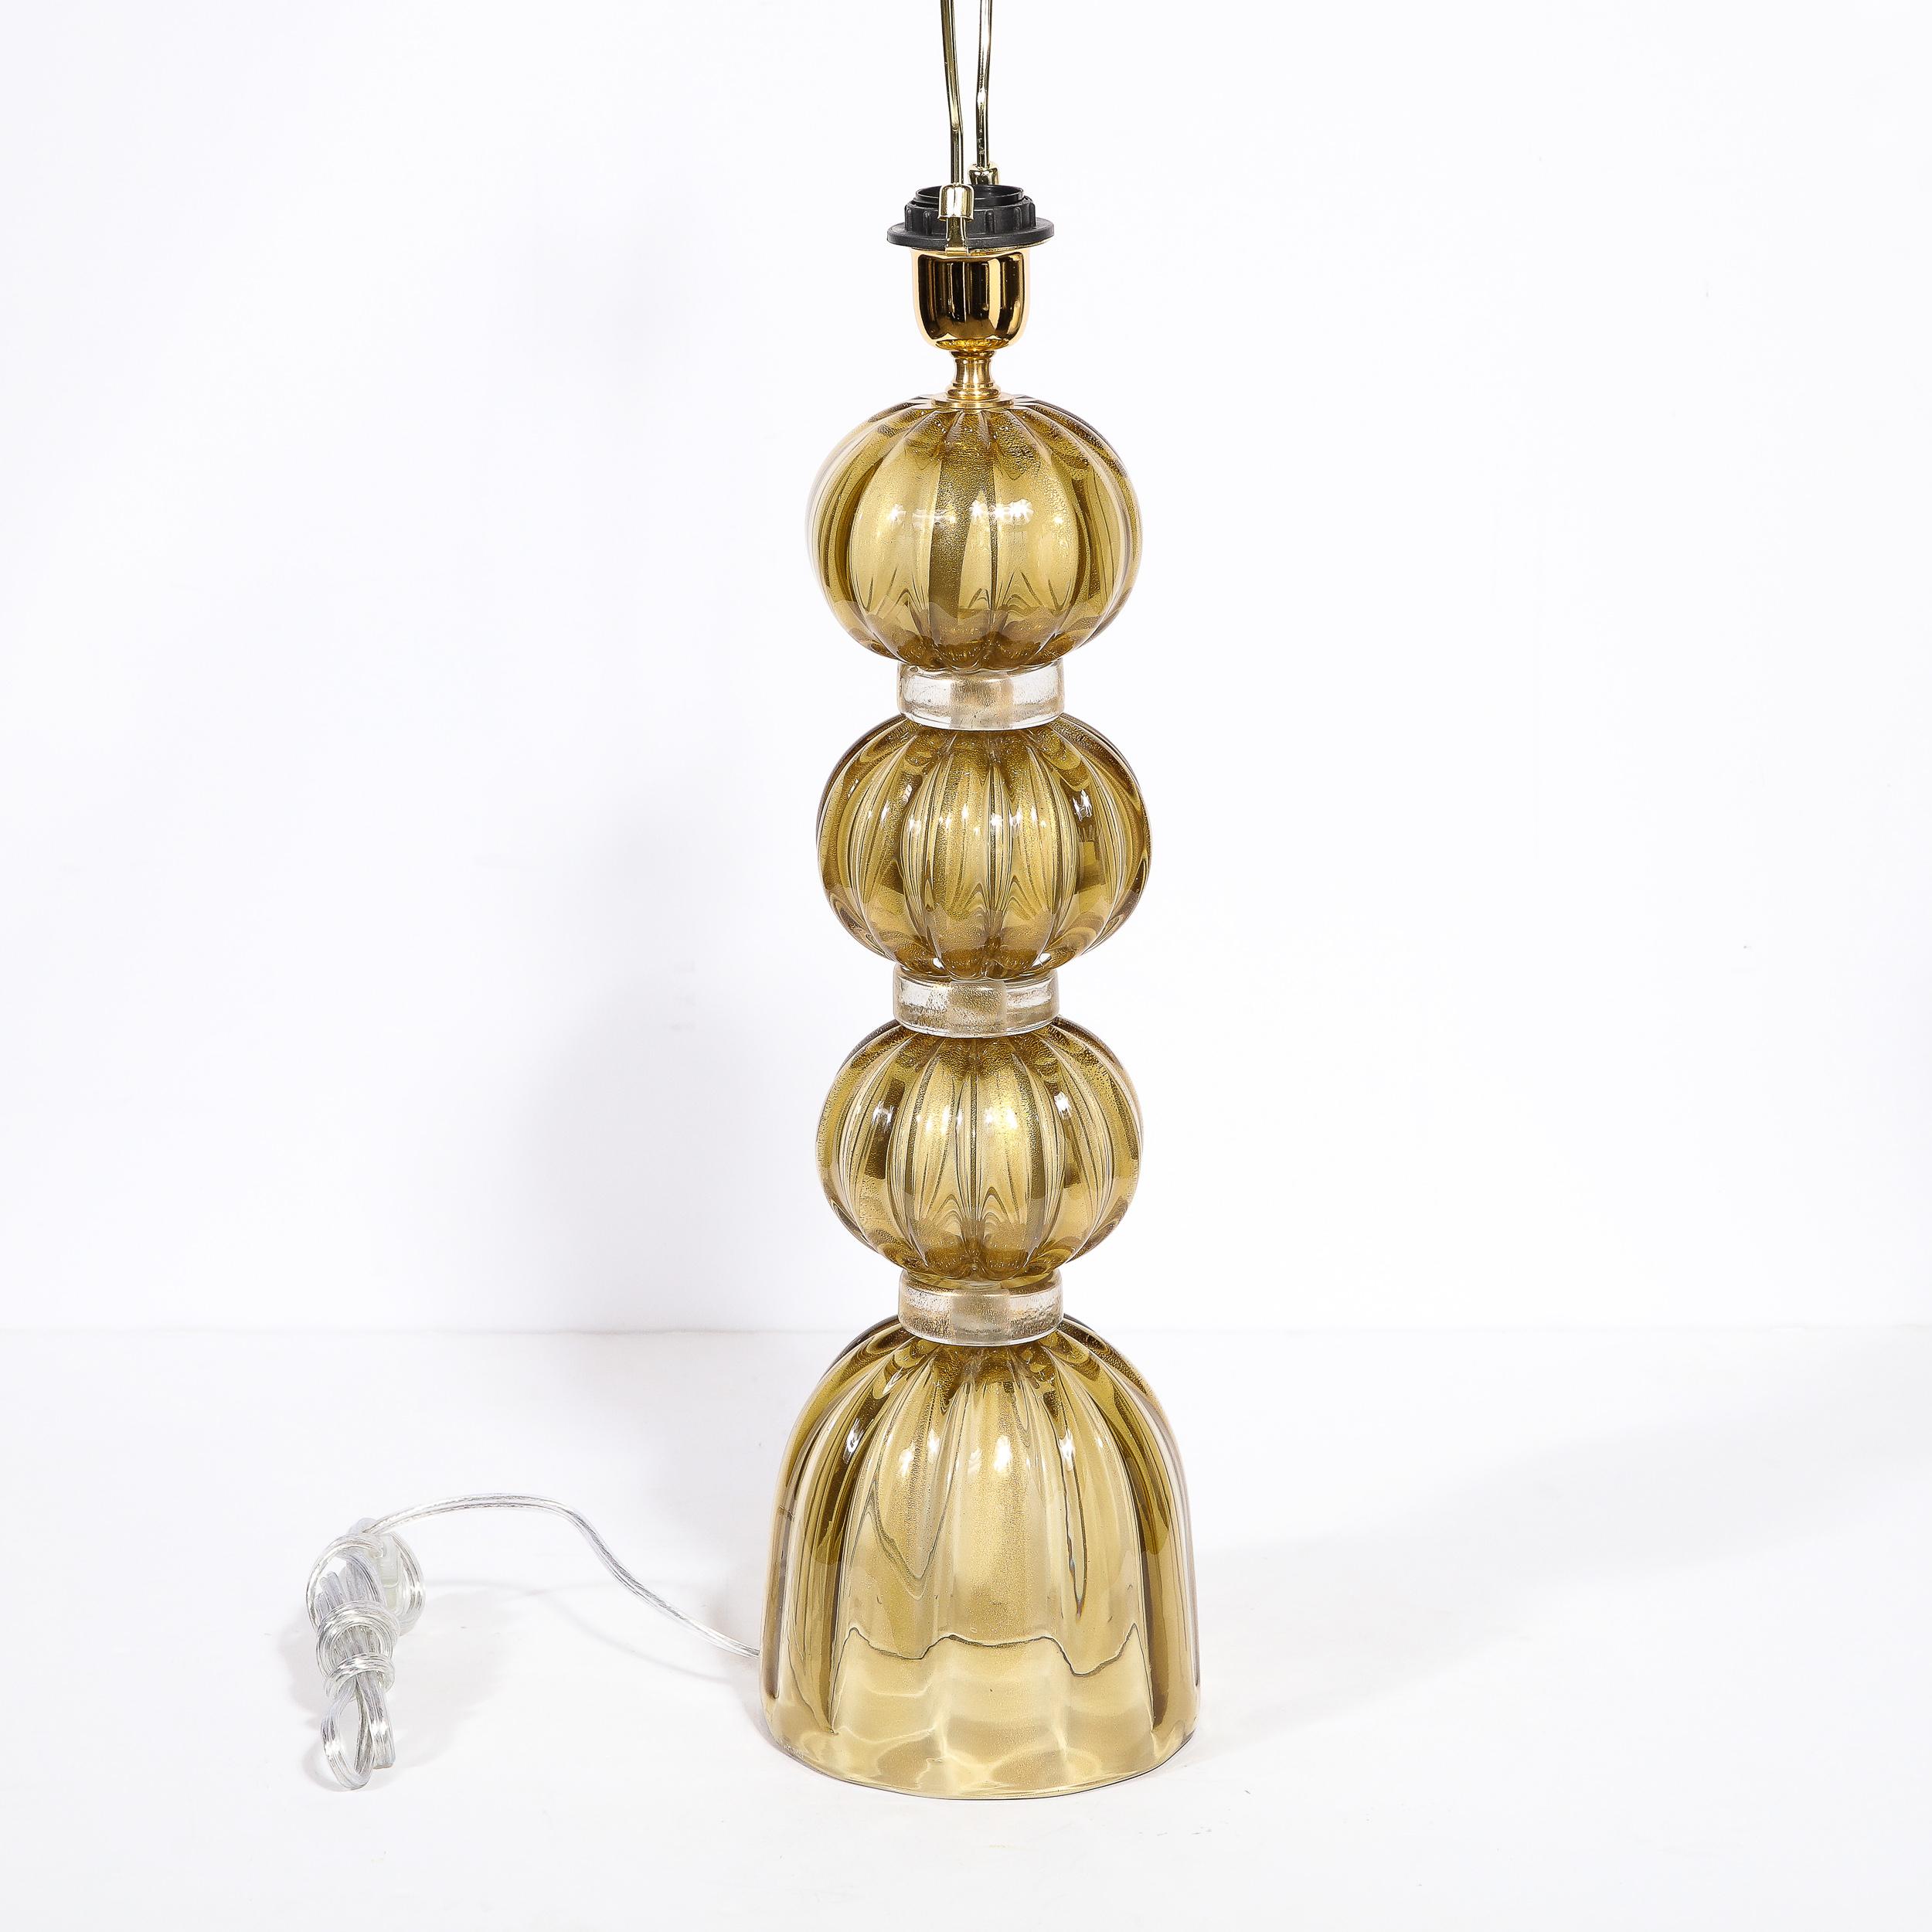 Modernist Hand-Blown Murano Glass Table Lamps in Smoked Gold W/ 24 Karat Flecks For Sale 6